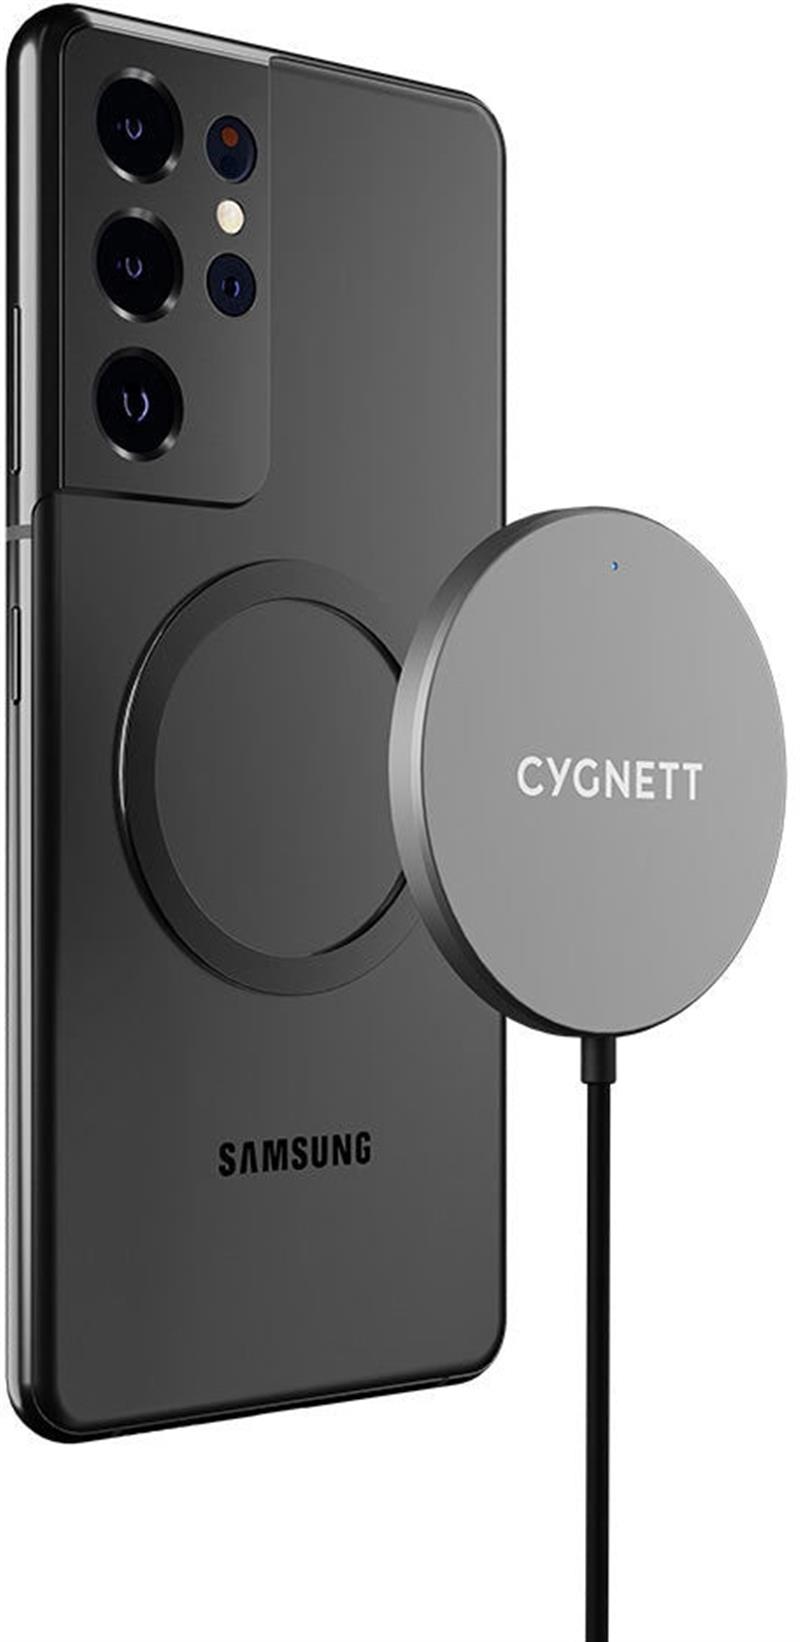 Cygnett MagCharge Cable 7 5W with 2m USB-C Cable Black